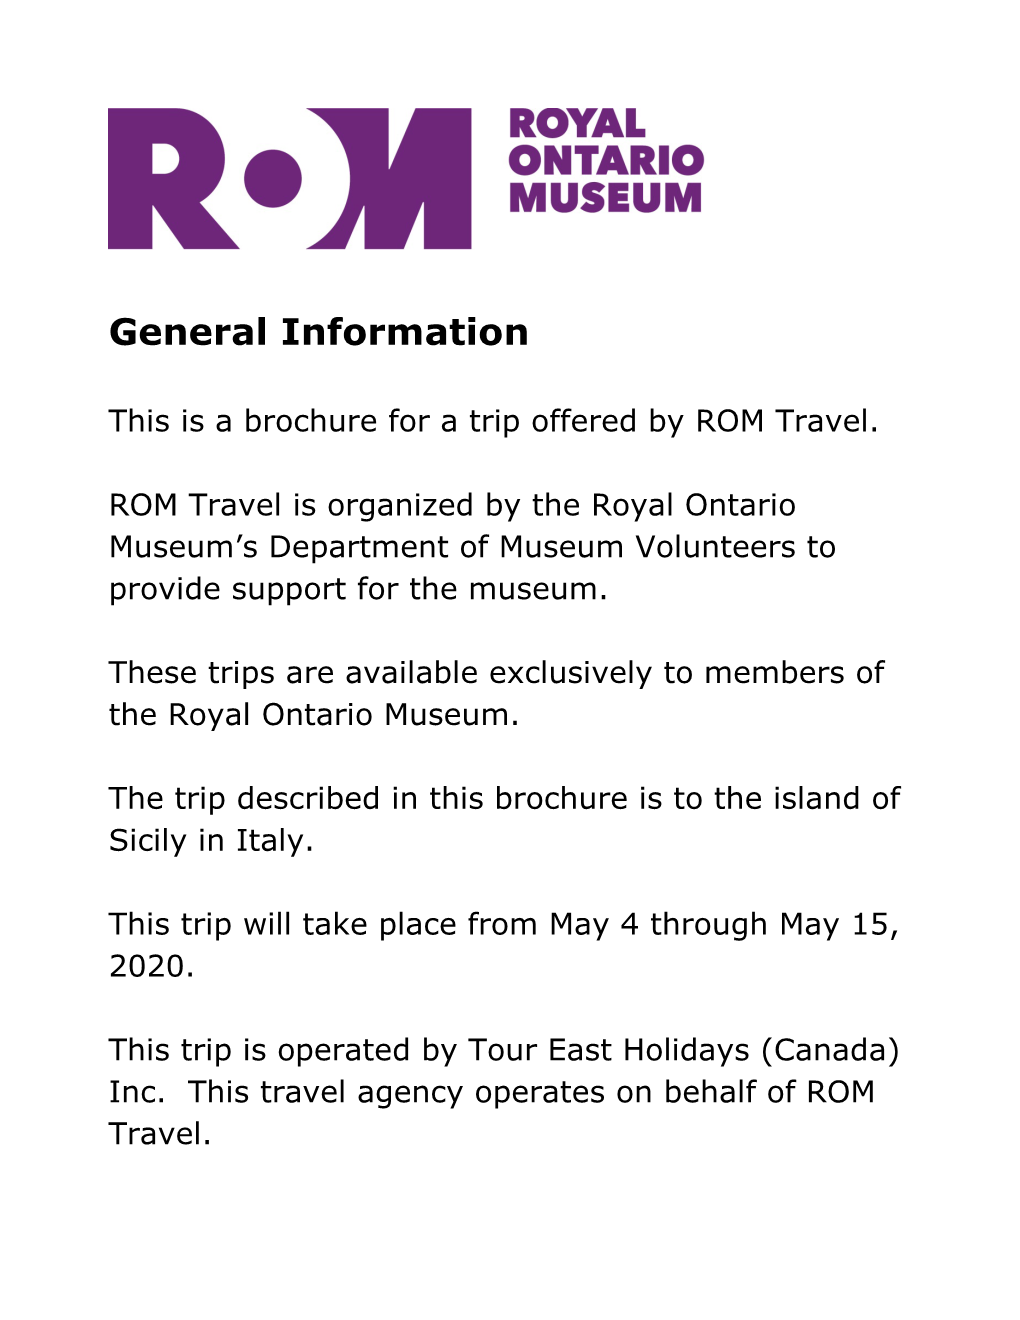 ROM Travel's Brochure for a Trip to Sicily